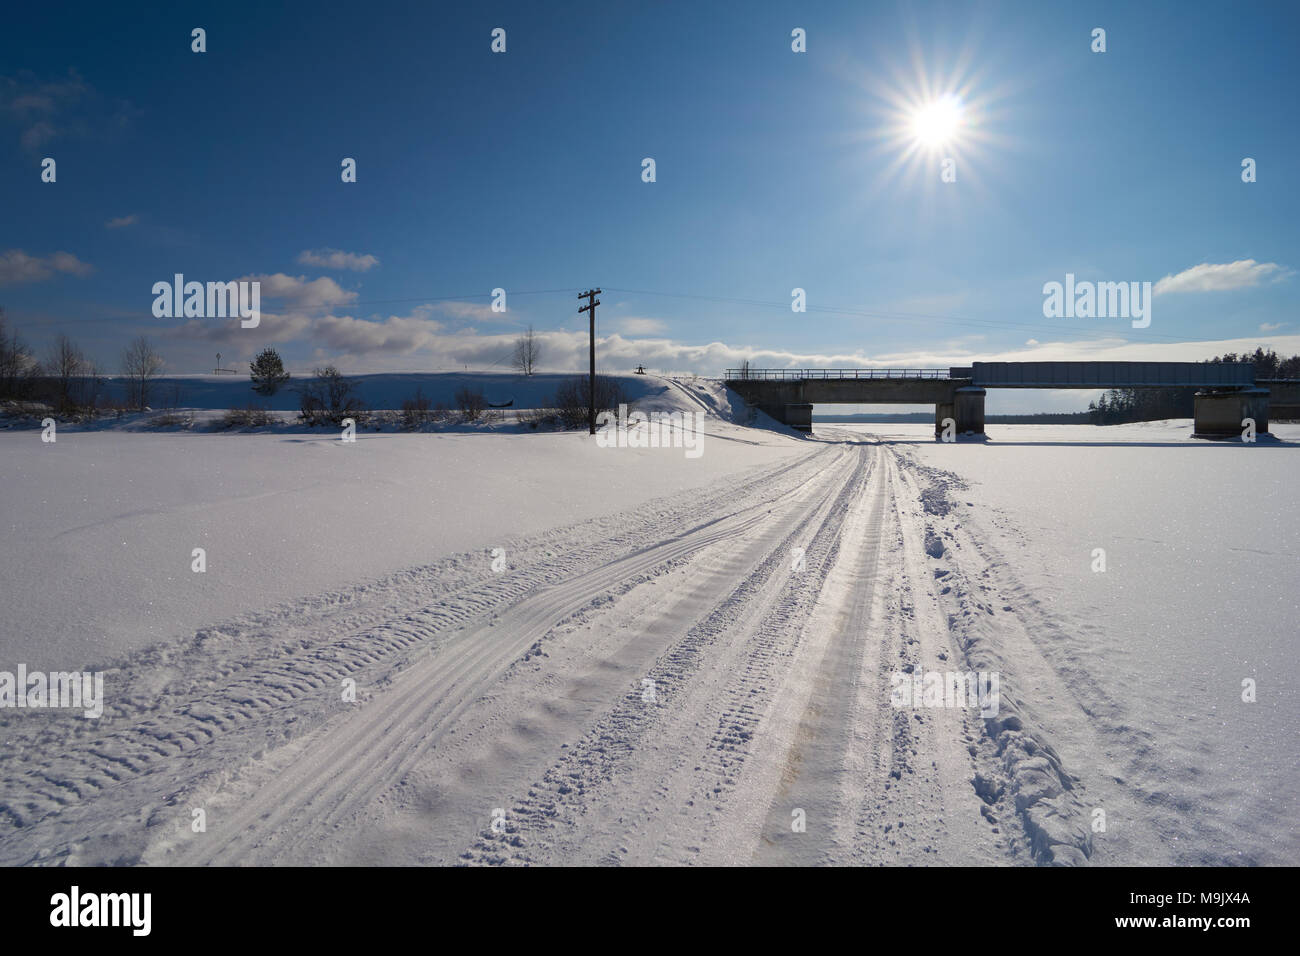 Ice road and railway bridge on Zhukopa river in winter with direct sun in the photograph, Peno district, Tver oblast, Russia Stock Photo